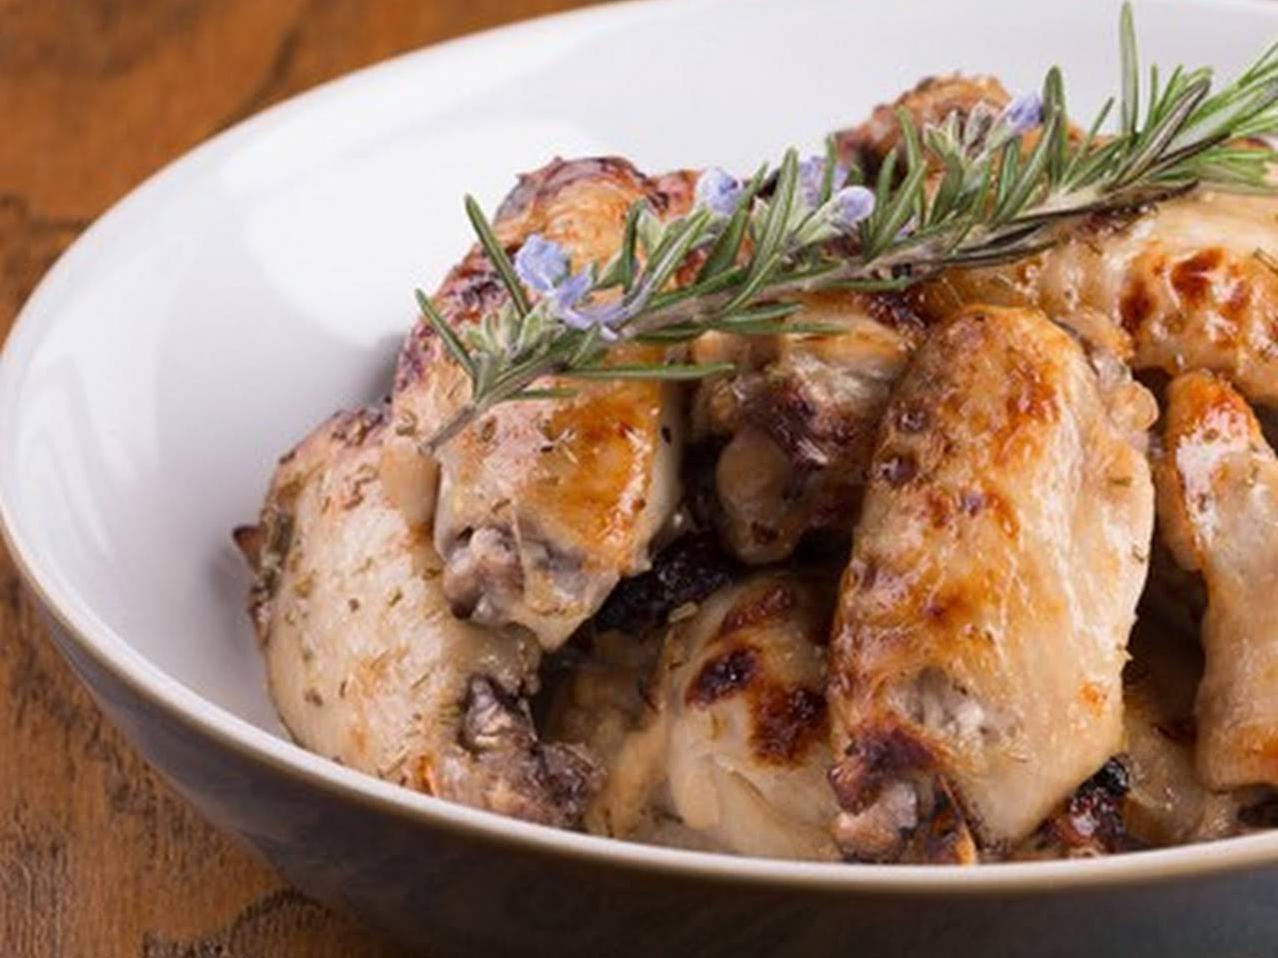  A feast for the eyes and the stomach – Lea & Perrins Sauteed Chicken